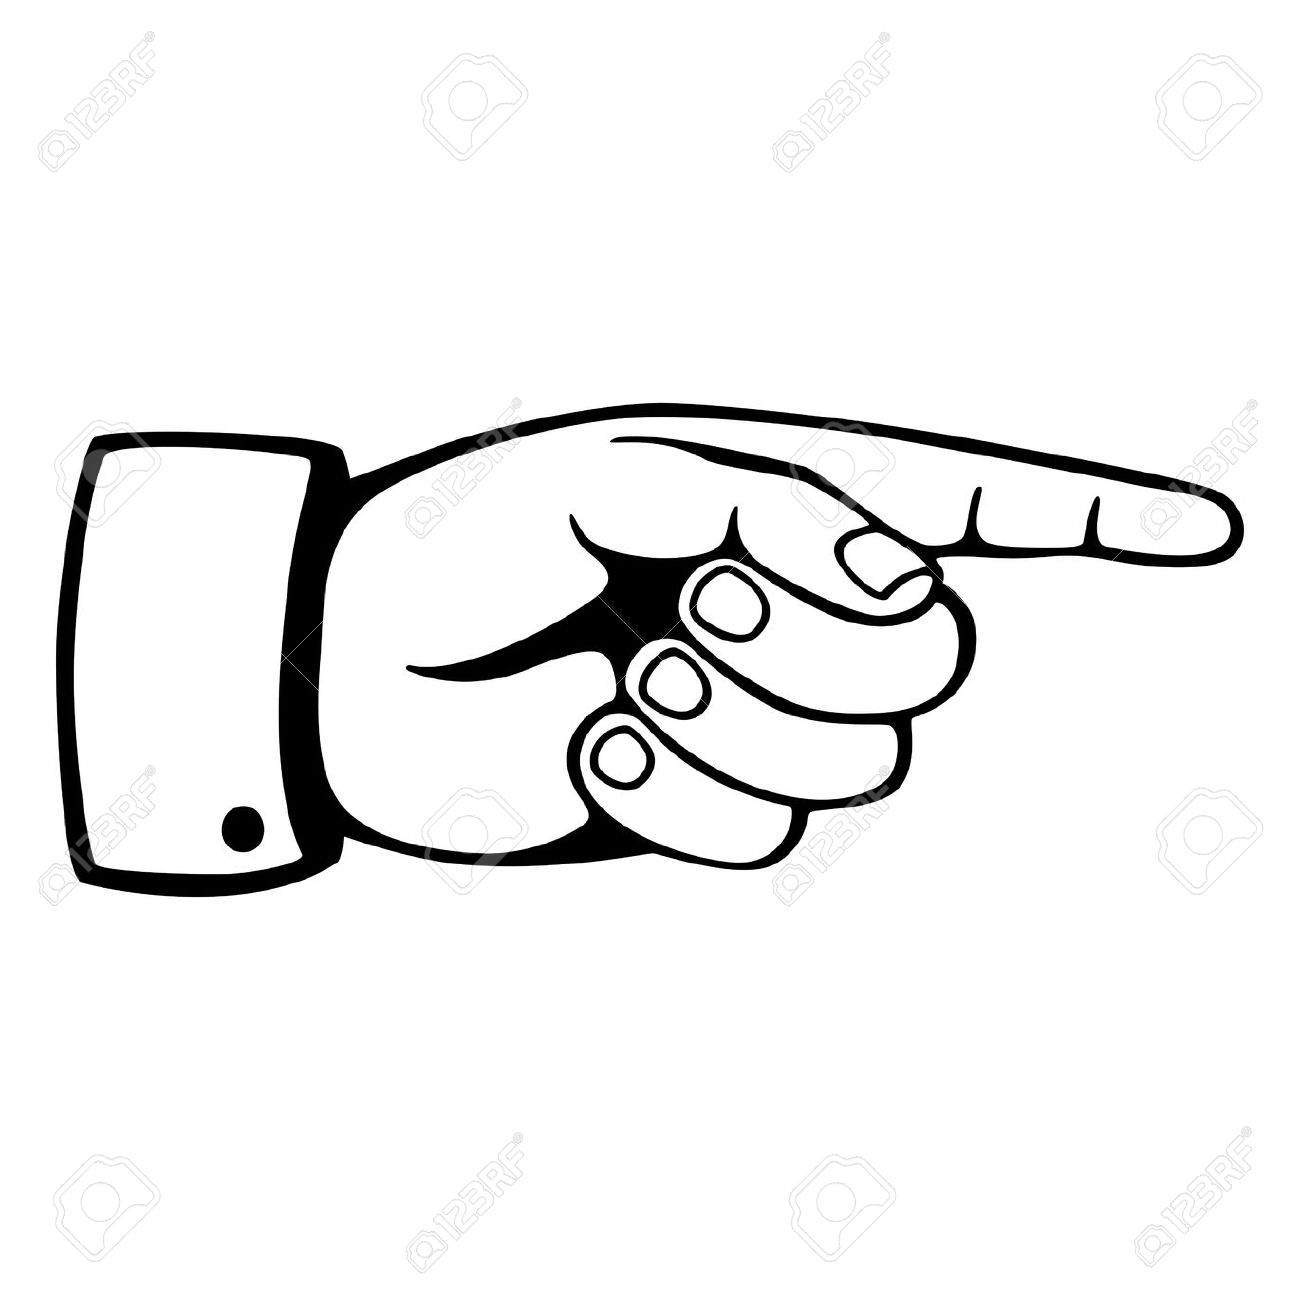 Pointing Hand Sign In Black And White Royalty Free Cliparts.